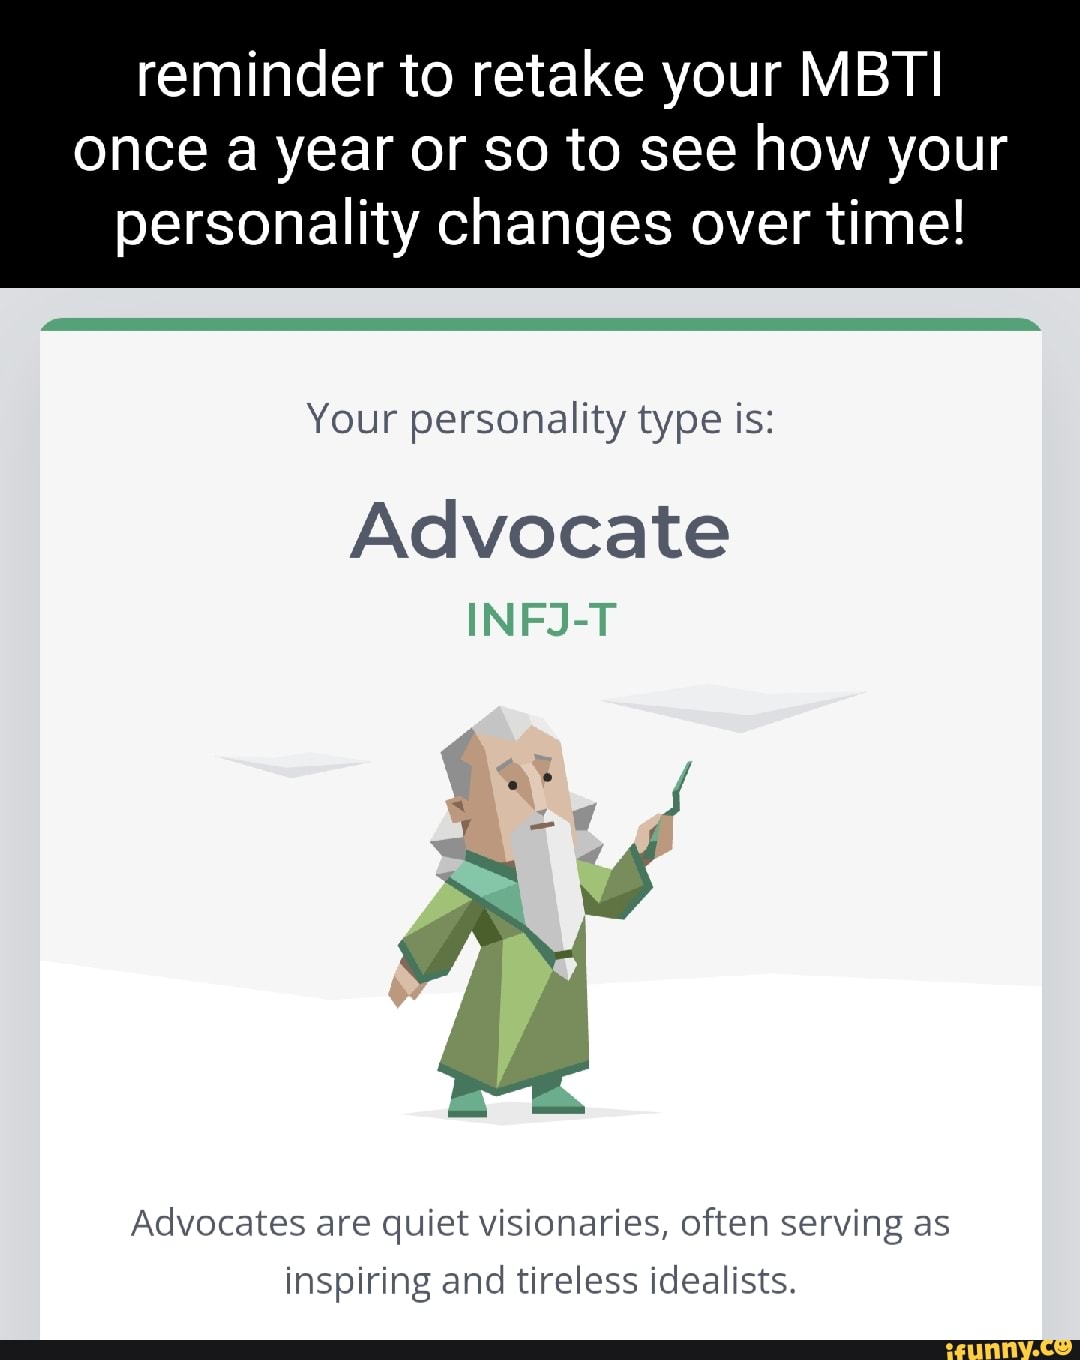 You're priceless - literally 😄 Know your personality type in the